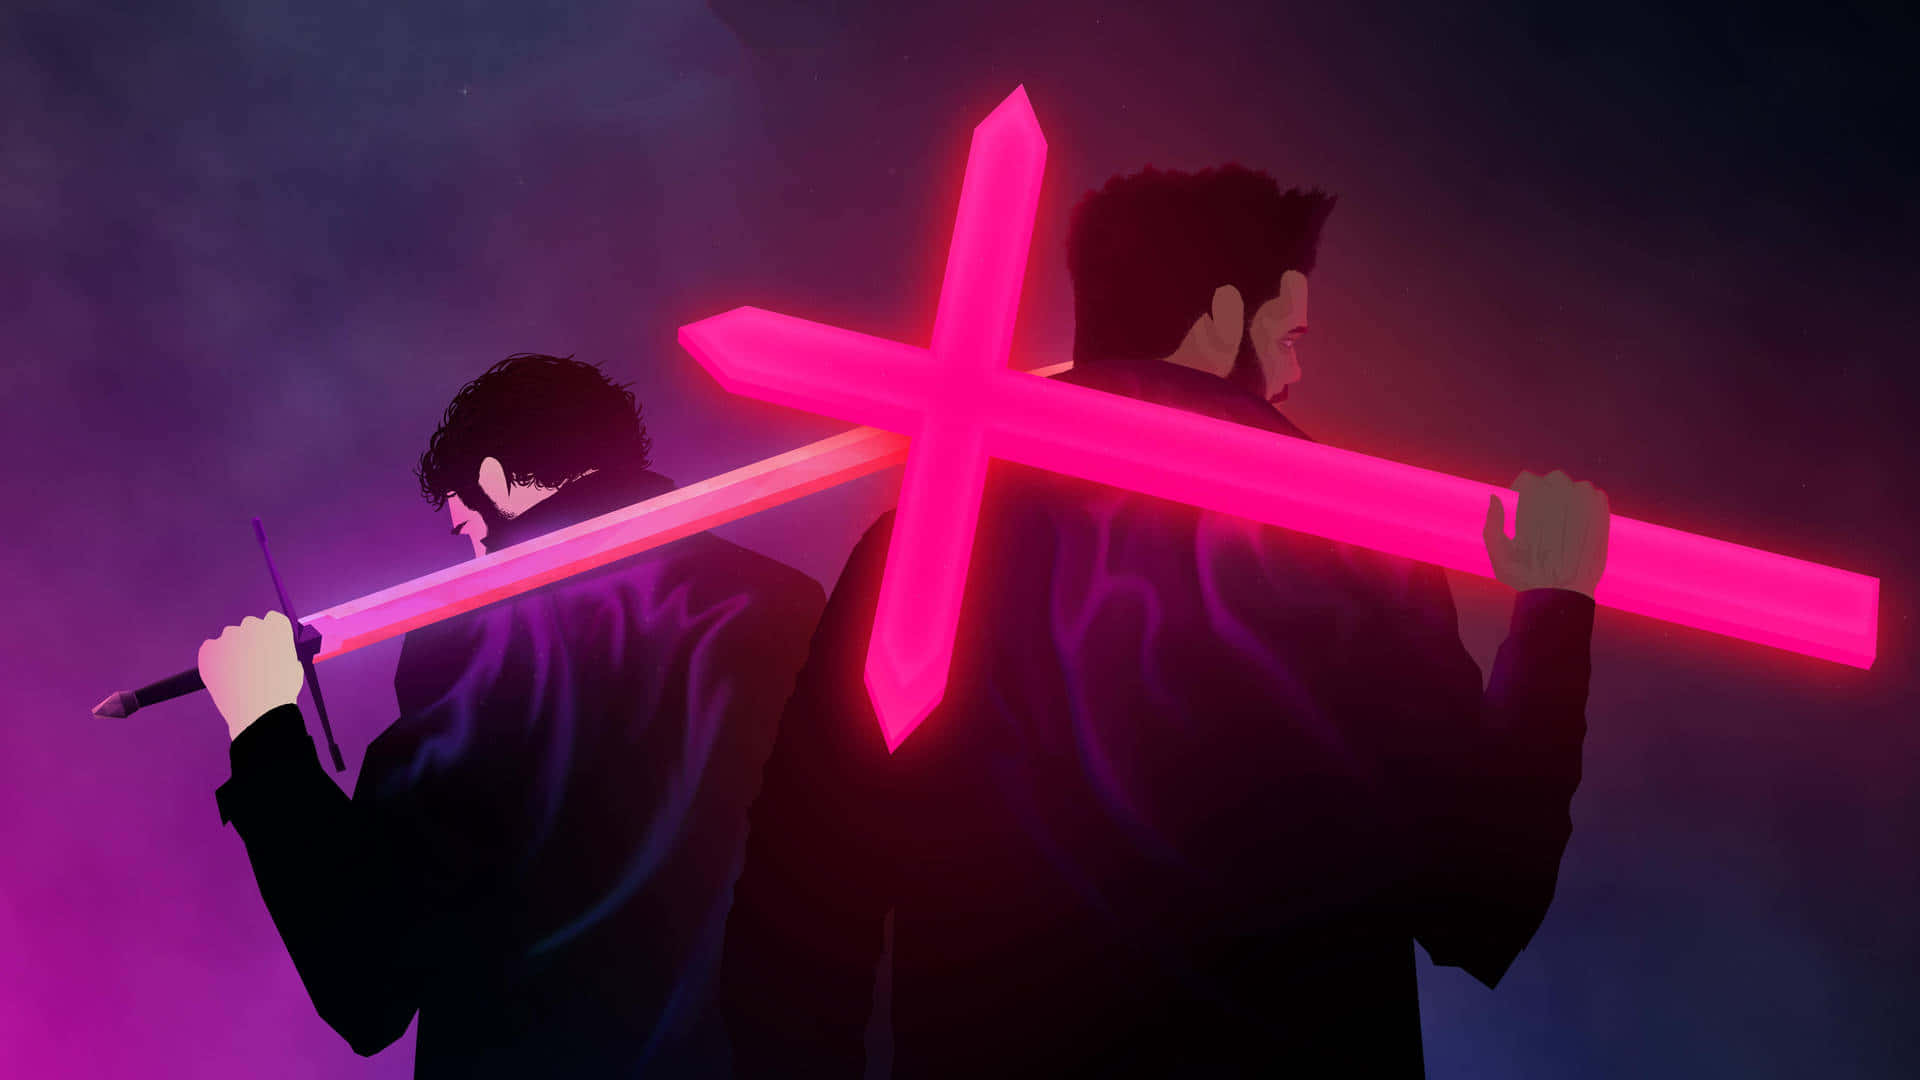 Two Men Holding A Pink Sword In Front Of A Dark Background